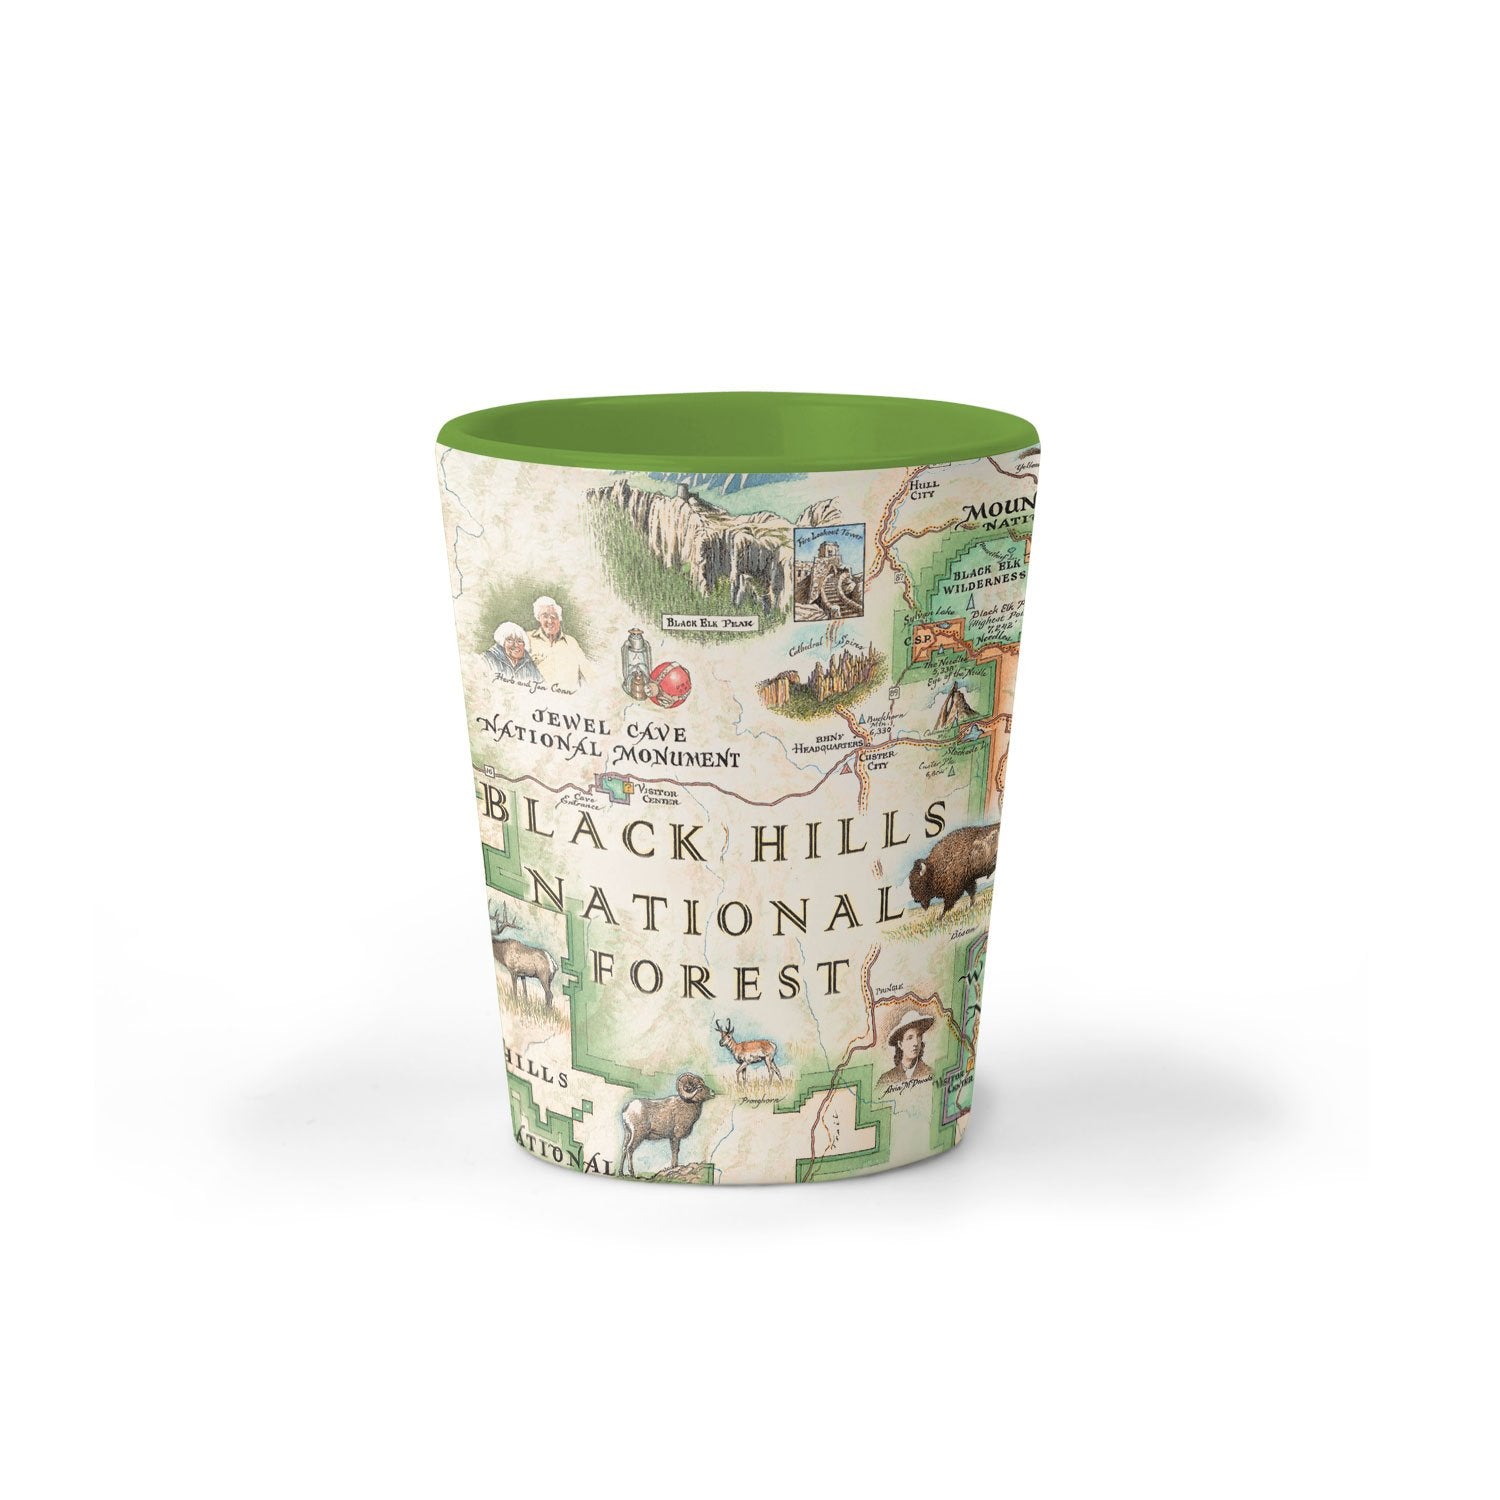 Black Hills National Forest Map Ceramic shot glass by Xplorer Maps. Featuring cities like Rapid City, Spearhead, Rapid City, and Sturgis. Mount Rushmore, Devils Tower, Jewel Cave National Monument, Custards, and Wind Cave National Park. Flora and Fauna illustrations include bison, elk, mountain goats, birds, pine trees, and native flowers. 